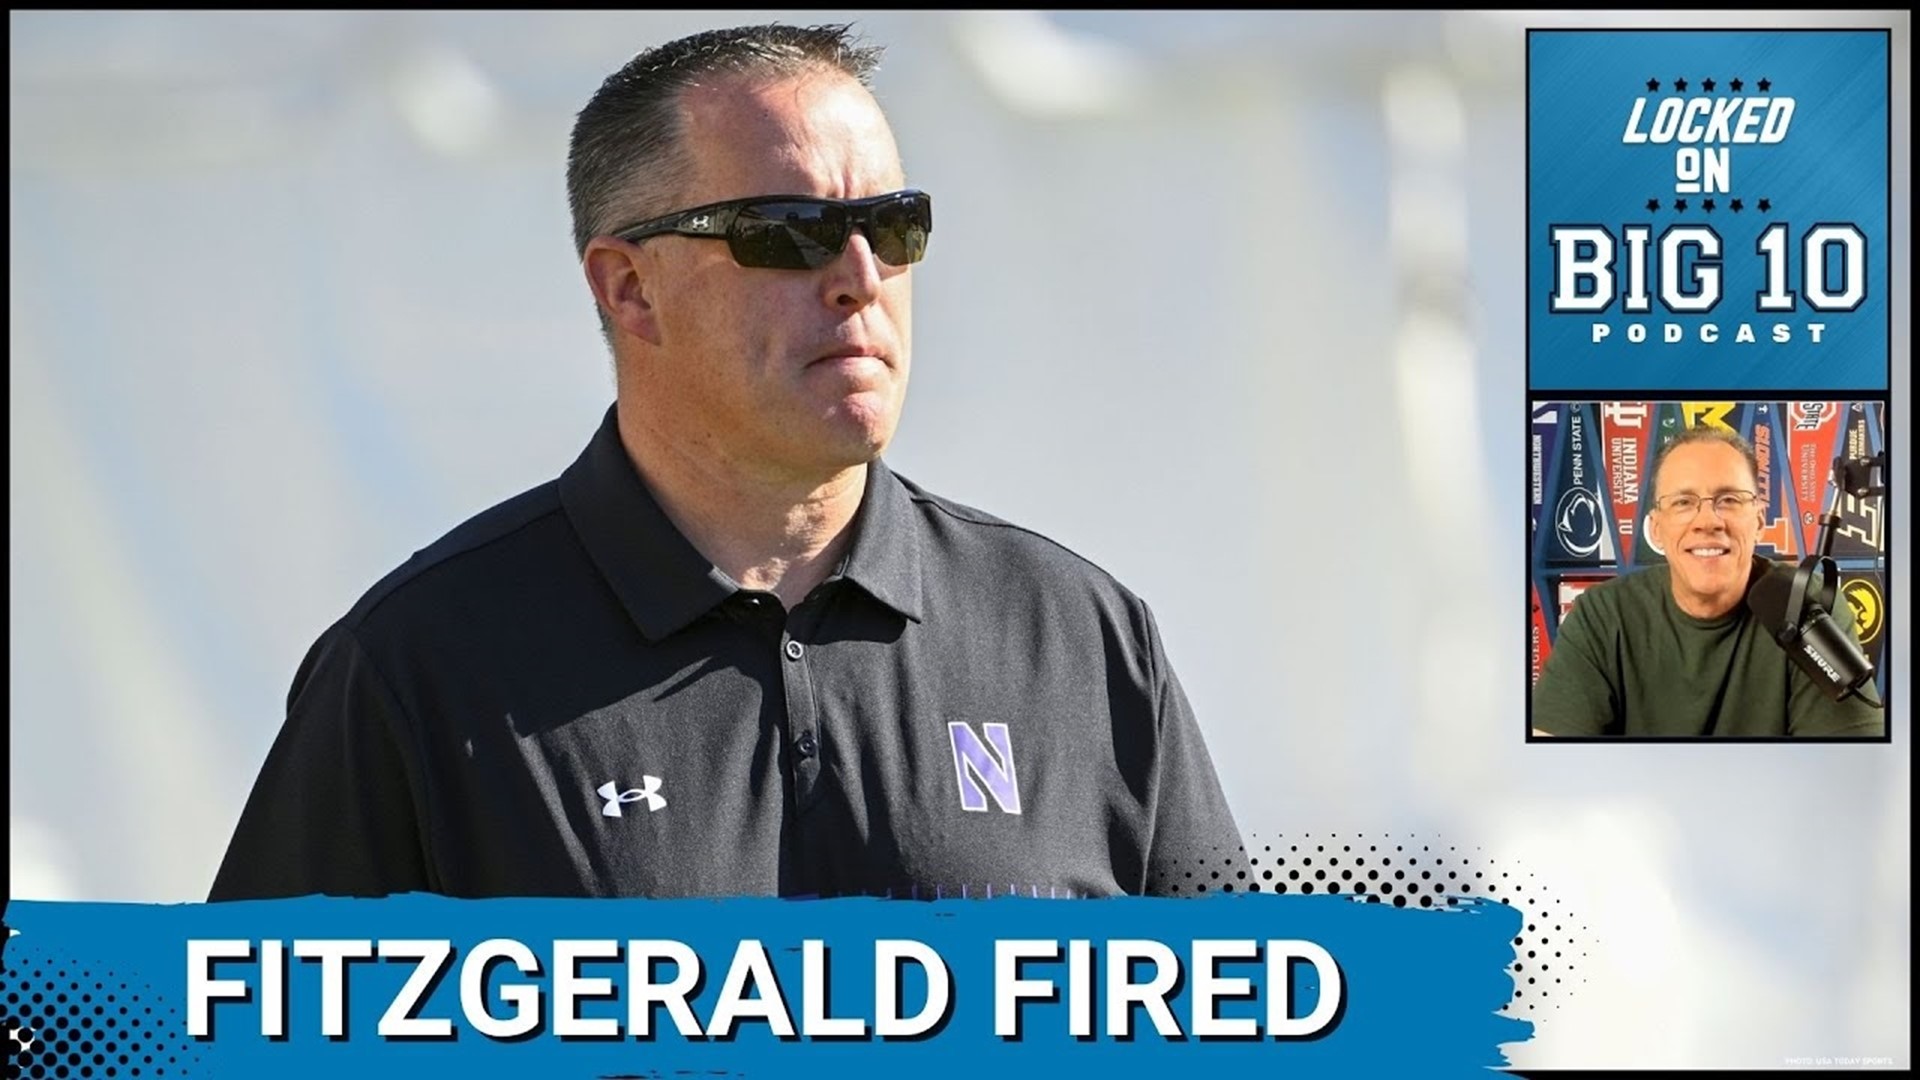 Northwestern University fired football Coach Pat Fitzgerald in light of hazing accusations brought forth by an anonymous former player.